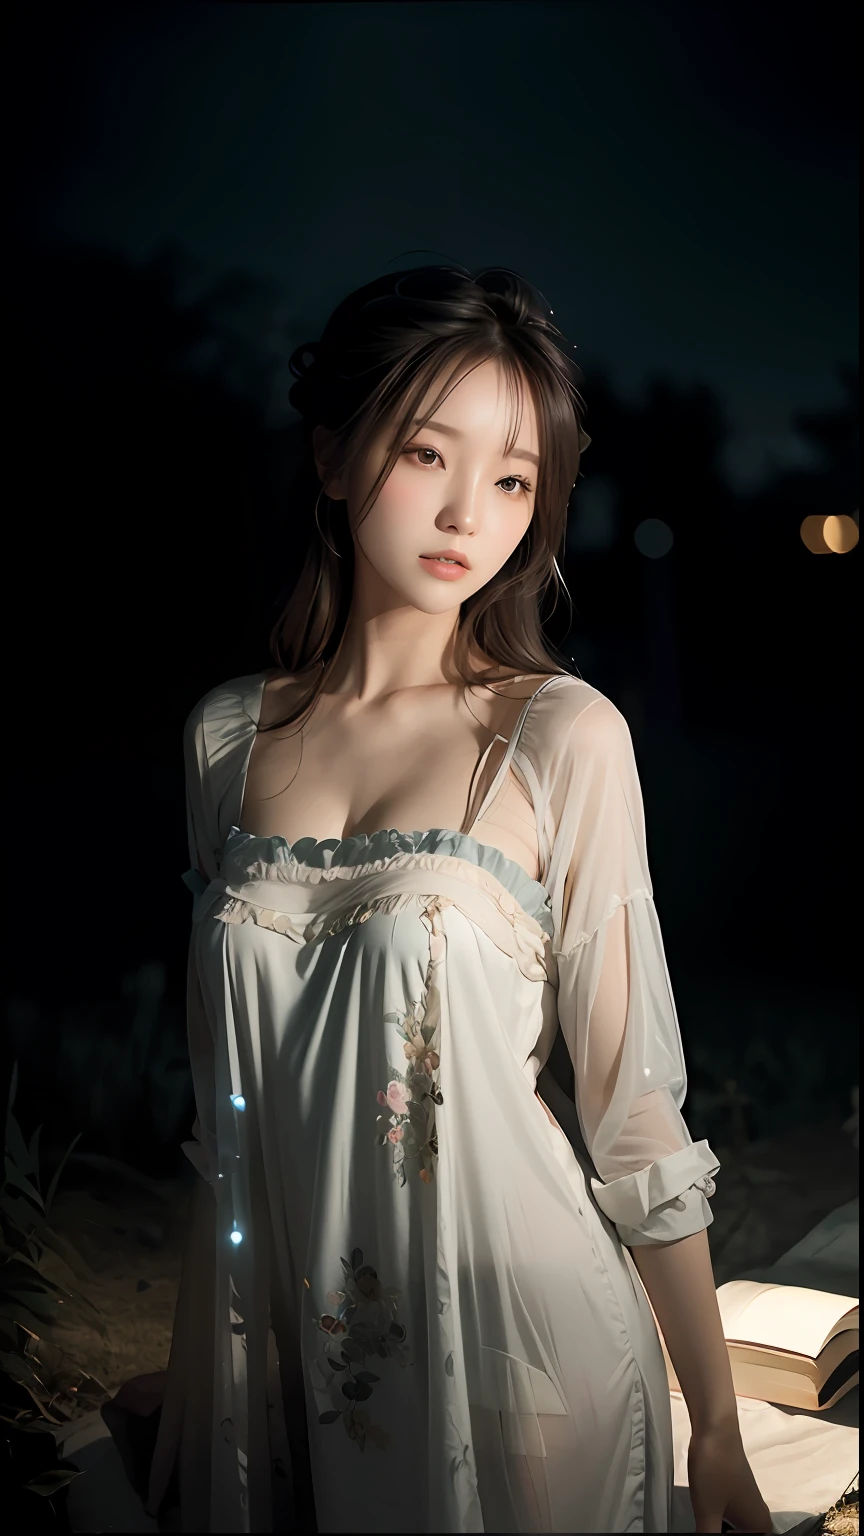 There was a woman standing in the field at night with a book, Ethereal beauty, a stunning young ethereal figure, in night gown wearing, pyjamas, dream medium portrait top light, Soft ethereal lighting, portrait soft low light, Very ethereal, author：Zhang Han, Ethereal and dreamy, Translucent dress, medium portrait top light, Light effect. Feminine, Incredibly ethereal